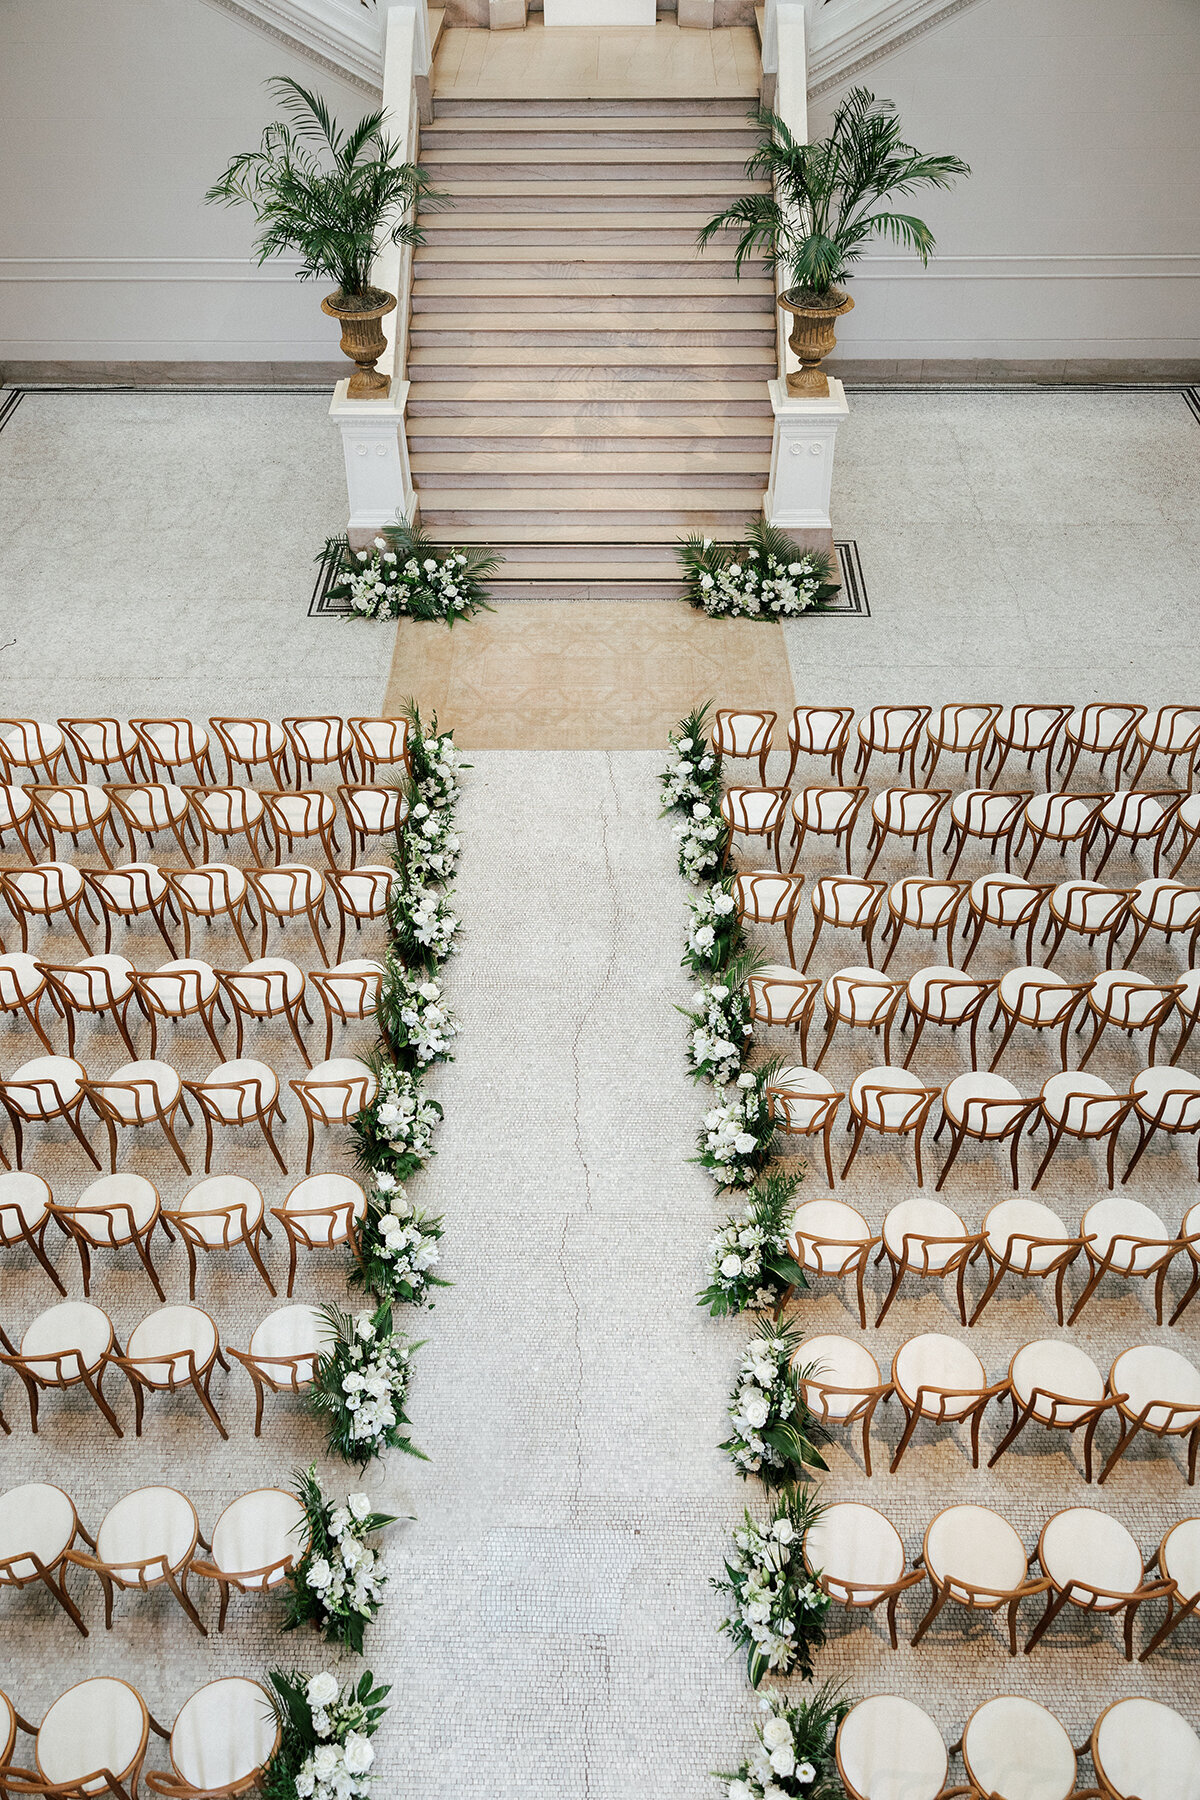 Sumner + Scott - New Orleans Museum of Art Wedding - Luxury Event Planning by Michelle Norwood - 11